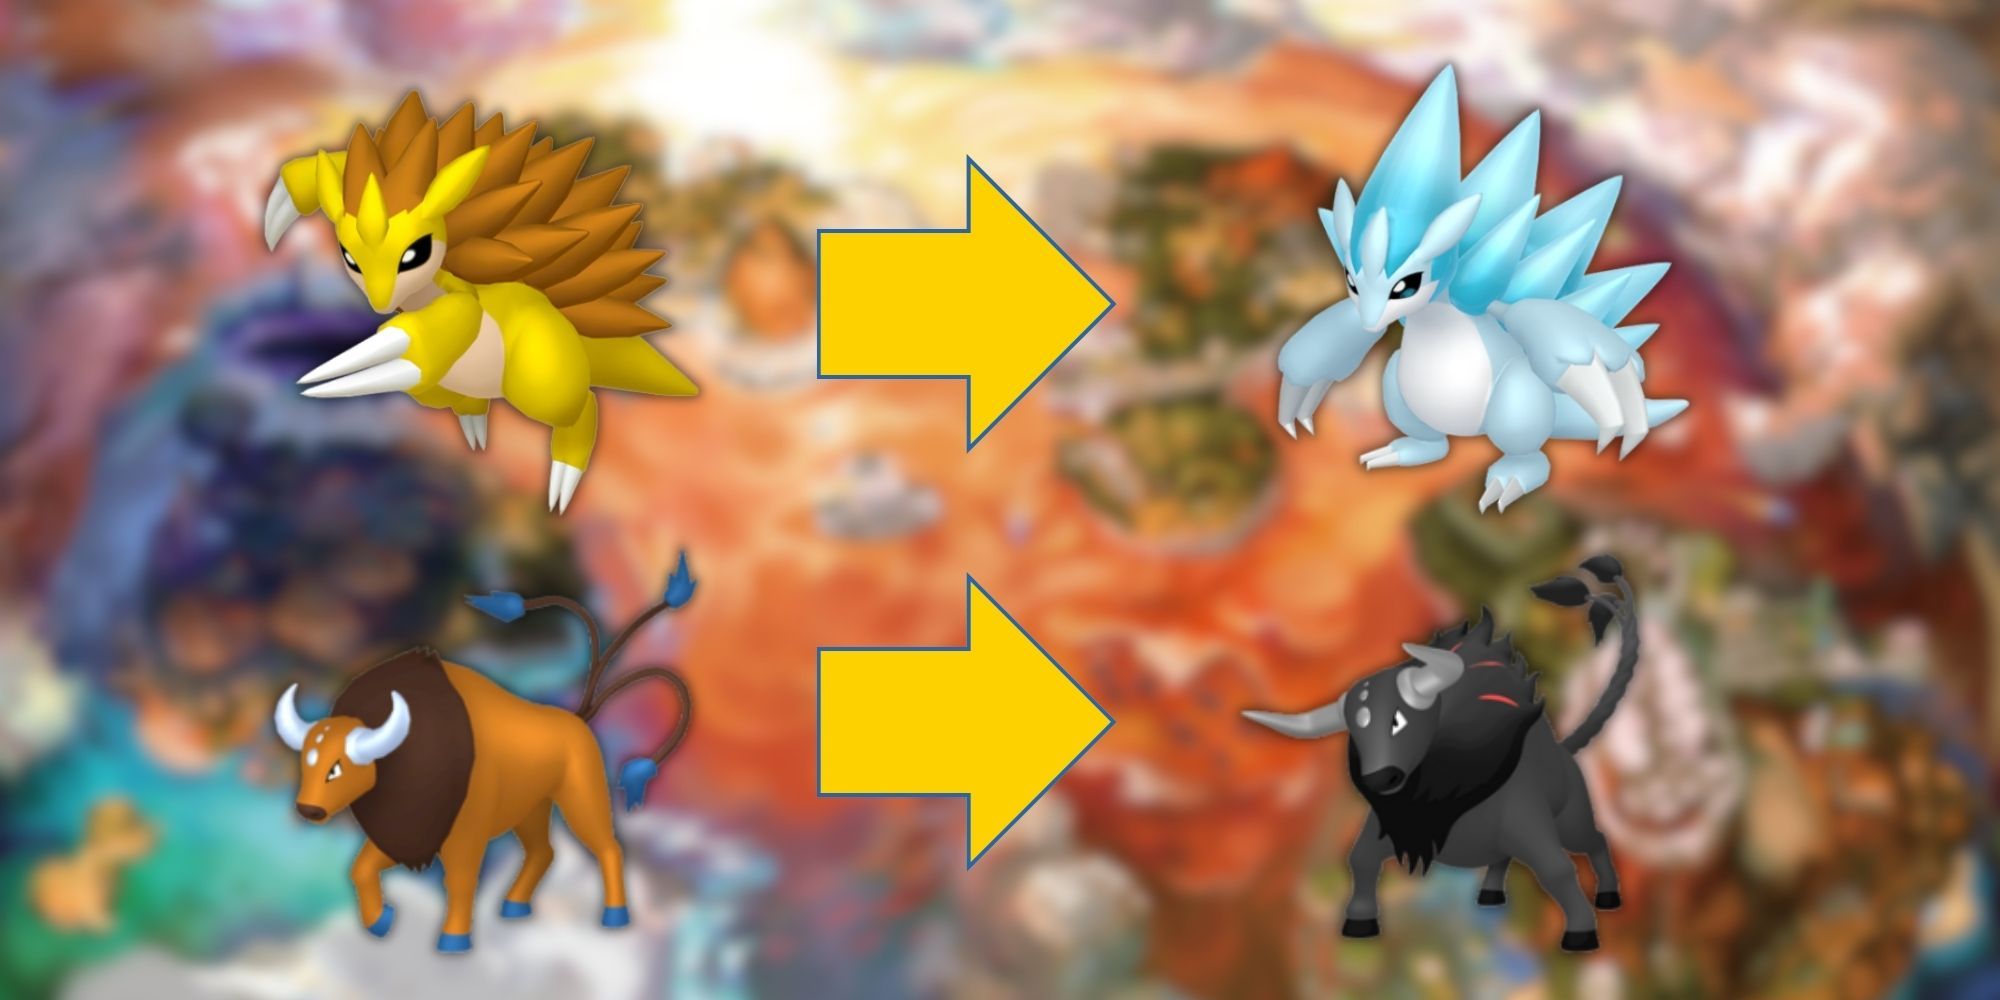 Some examples of bland Pokemon who were redeemed with a cool regional form: Kantonian Sandslash & Alolan Sandslash, and Kantonian Tauros & Paldean Tauros.